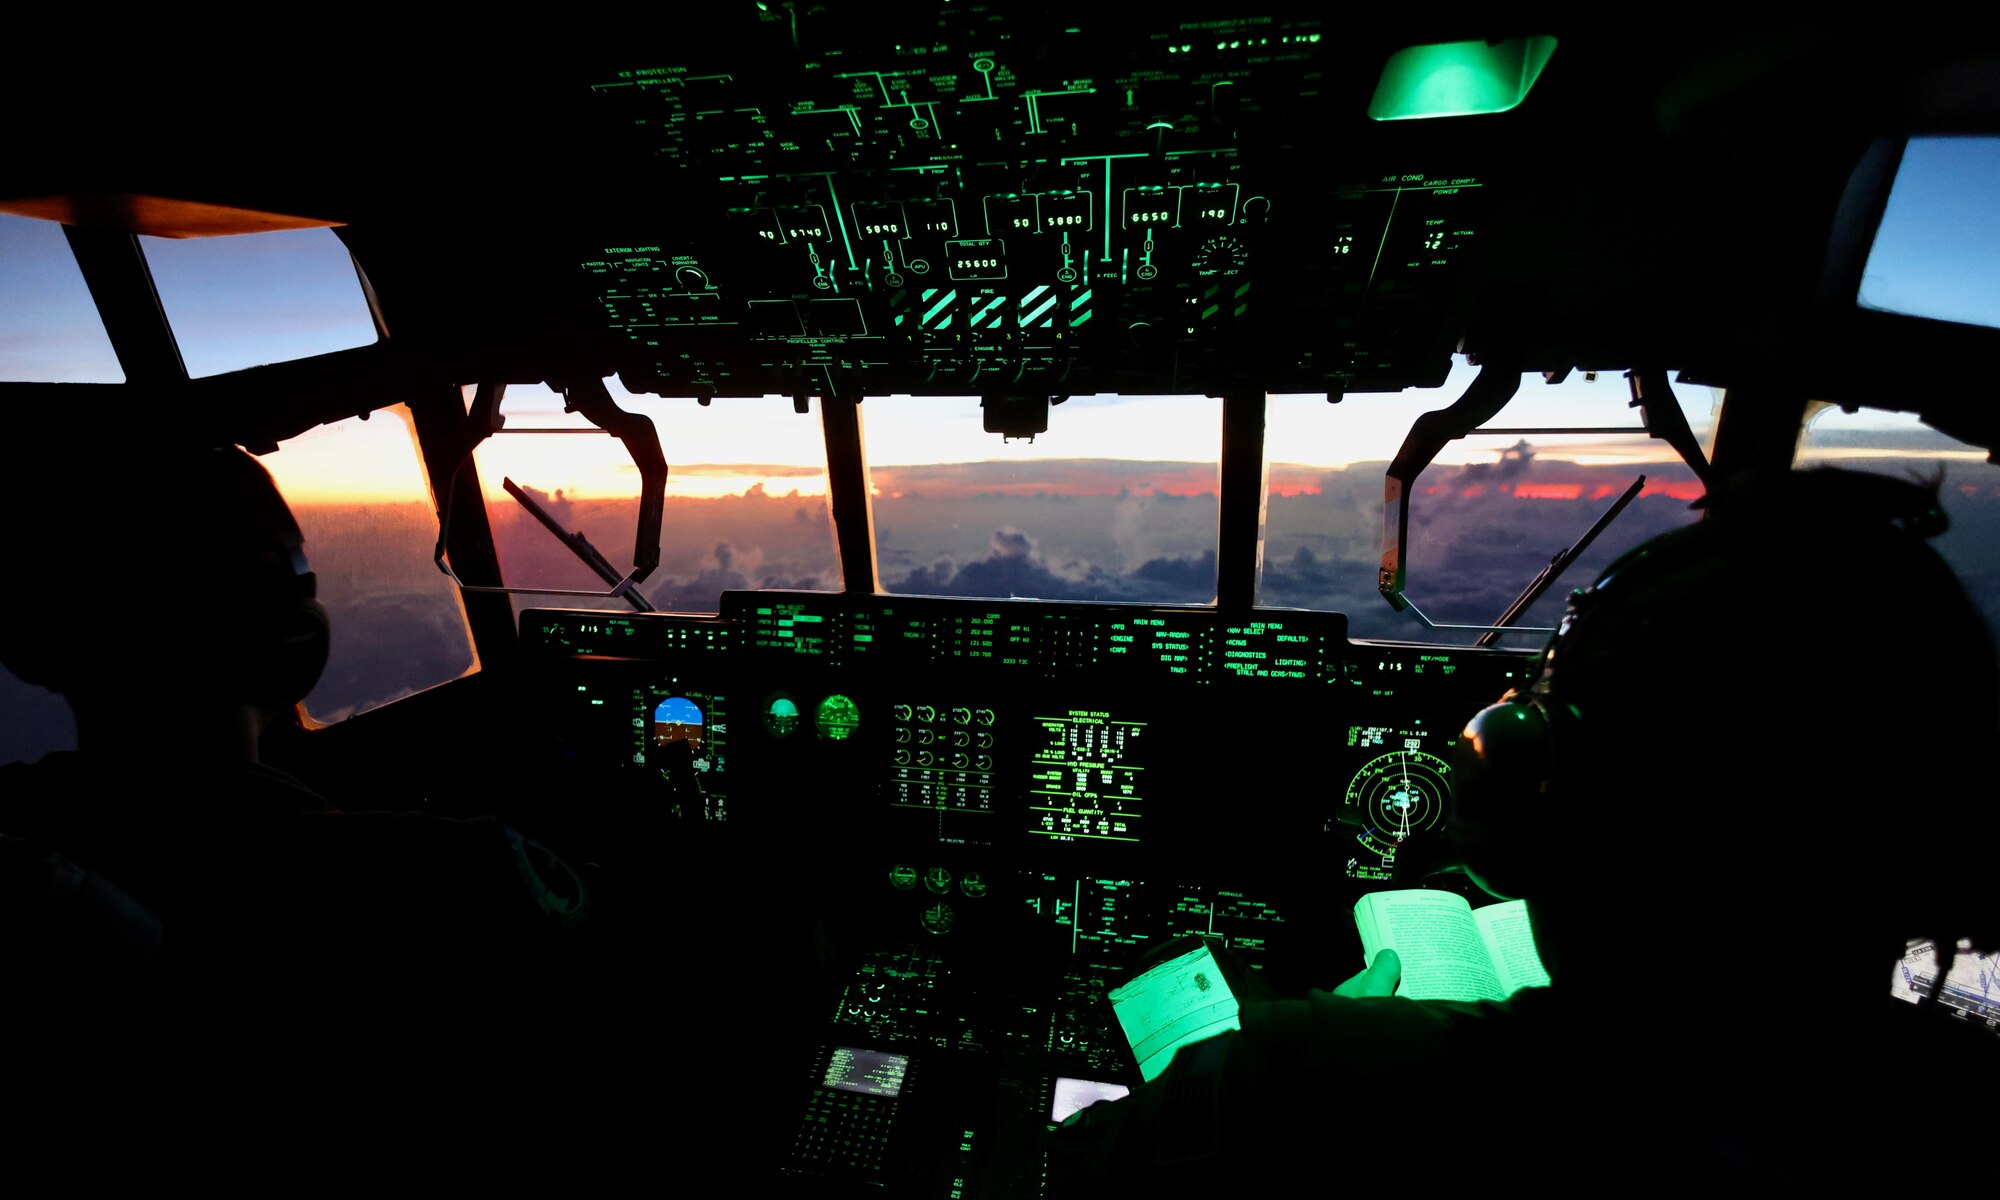 Pilots fly into tropical storm system, image showing sunset out of cockpit window.